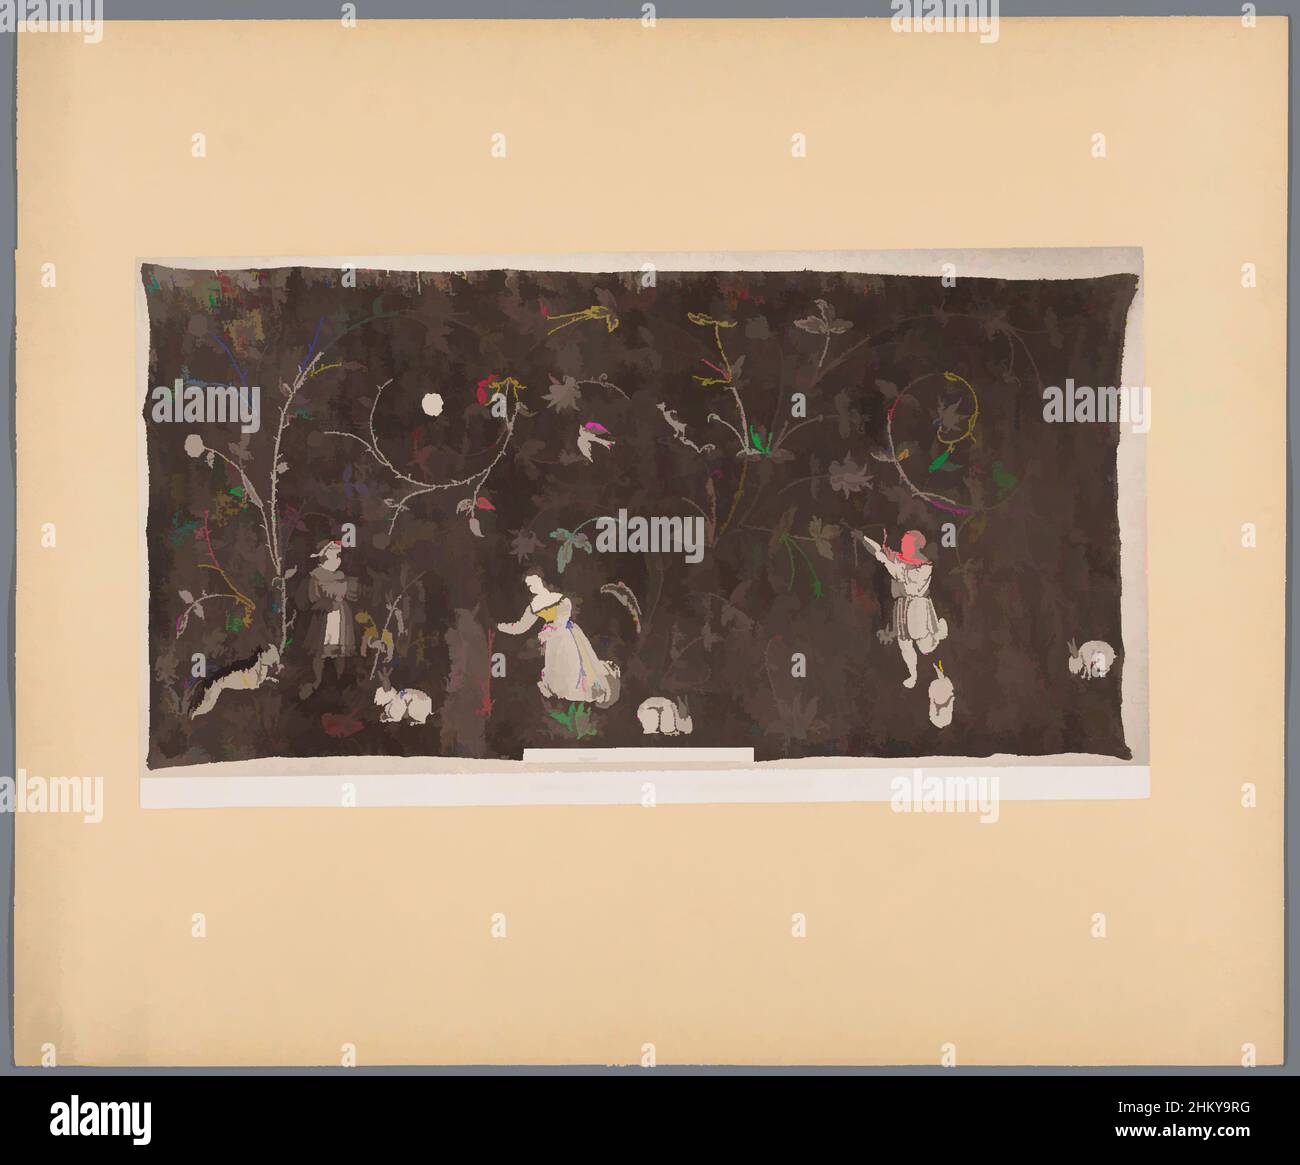 Art inspired by Textile decorated with flowers and youth as a representation of spring, Stickerei auf Leinwand, Frühling und Jugend darsstellend 1533., Europe, c. 1875 - c. 1900, cardboard, paper, collotype, height 152 mm × width 279 mm, Classic works modernized by Artotop with a splash of modernity. Shapes, color and value, eye-catching visual impact on art. Emotions through freedom of artworks in a contemporary way. A timeless message pursuing a wildly creative new direction. Artists turning to the digital medium and creating the Artotop NFT Stock Photo